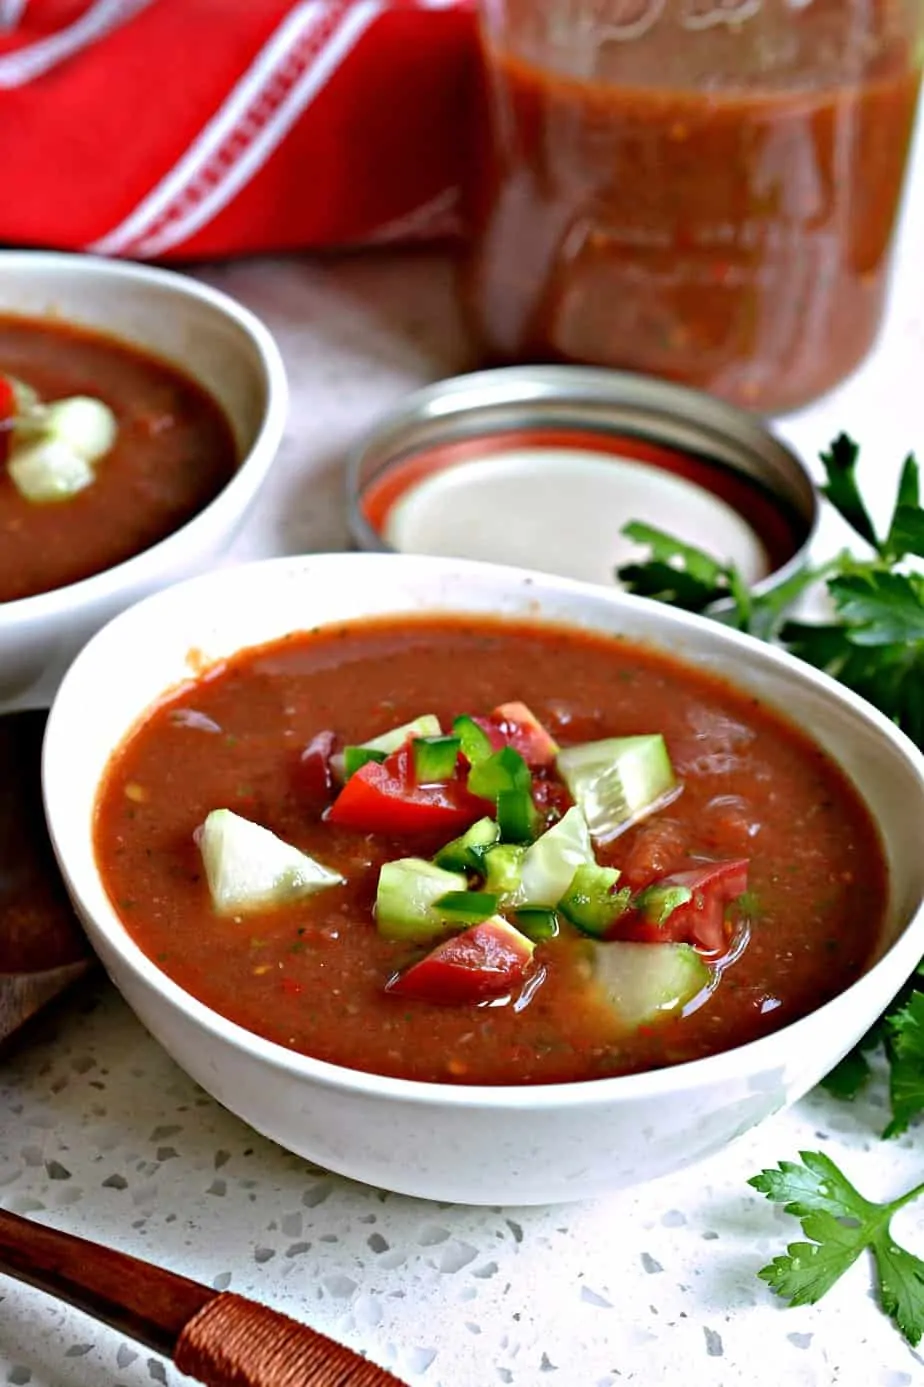 This Spanish Gazpacho recipe is bursting with the flavors of sun-ripened tomatoes, cucumber and sweet red bell pepper. 